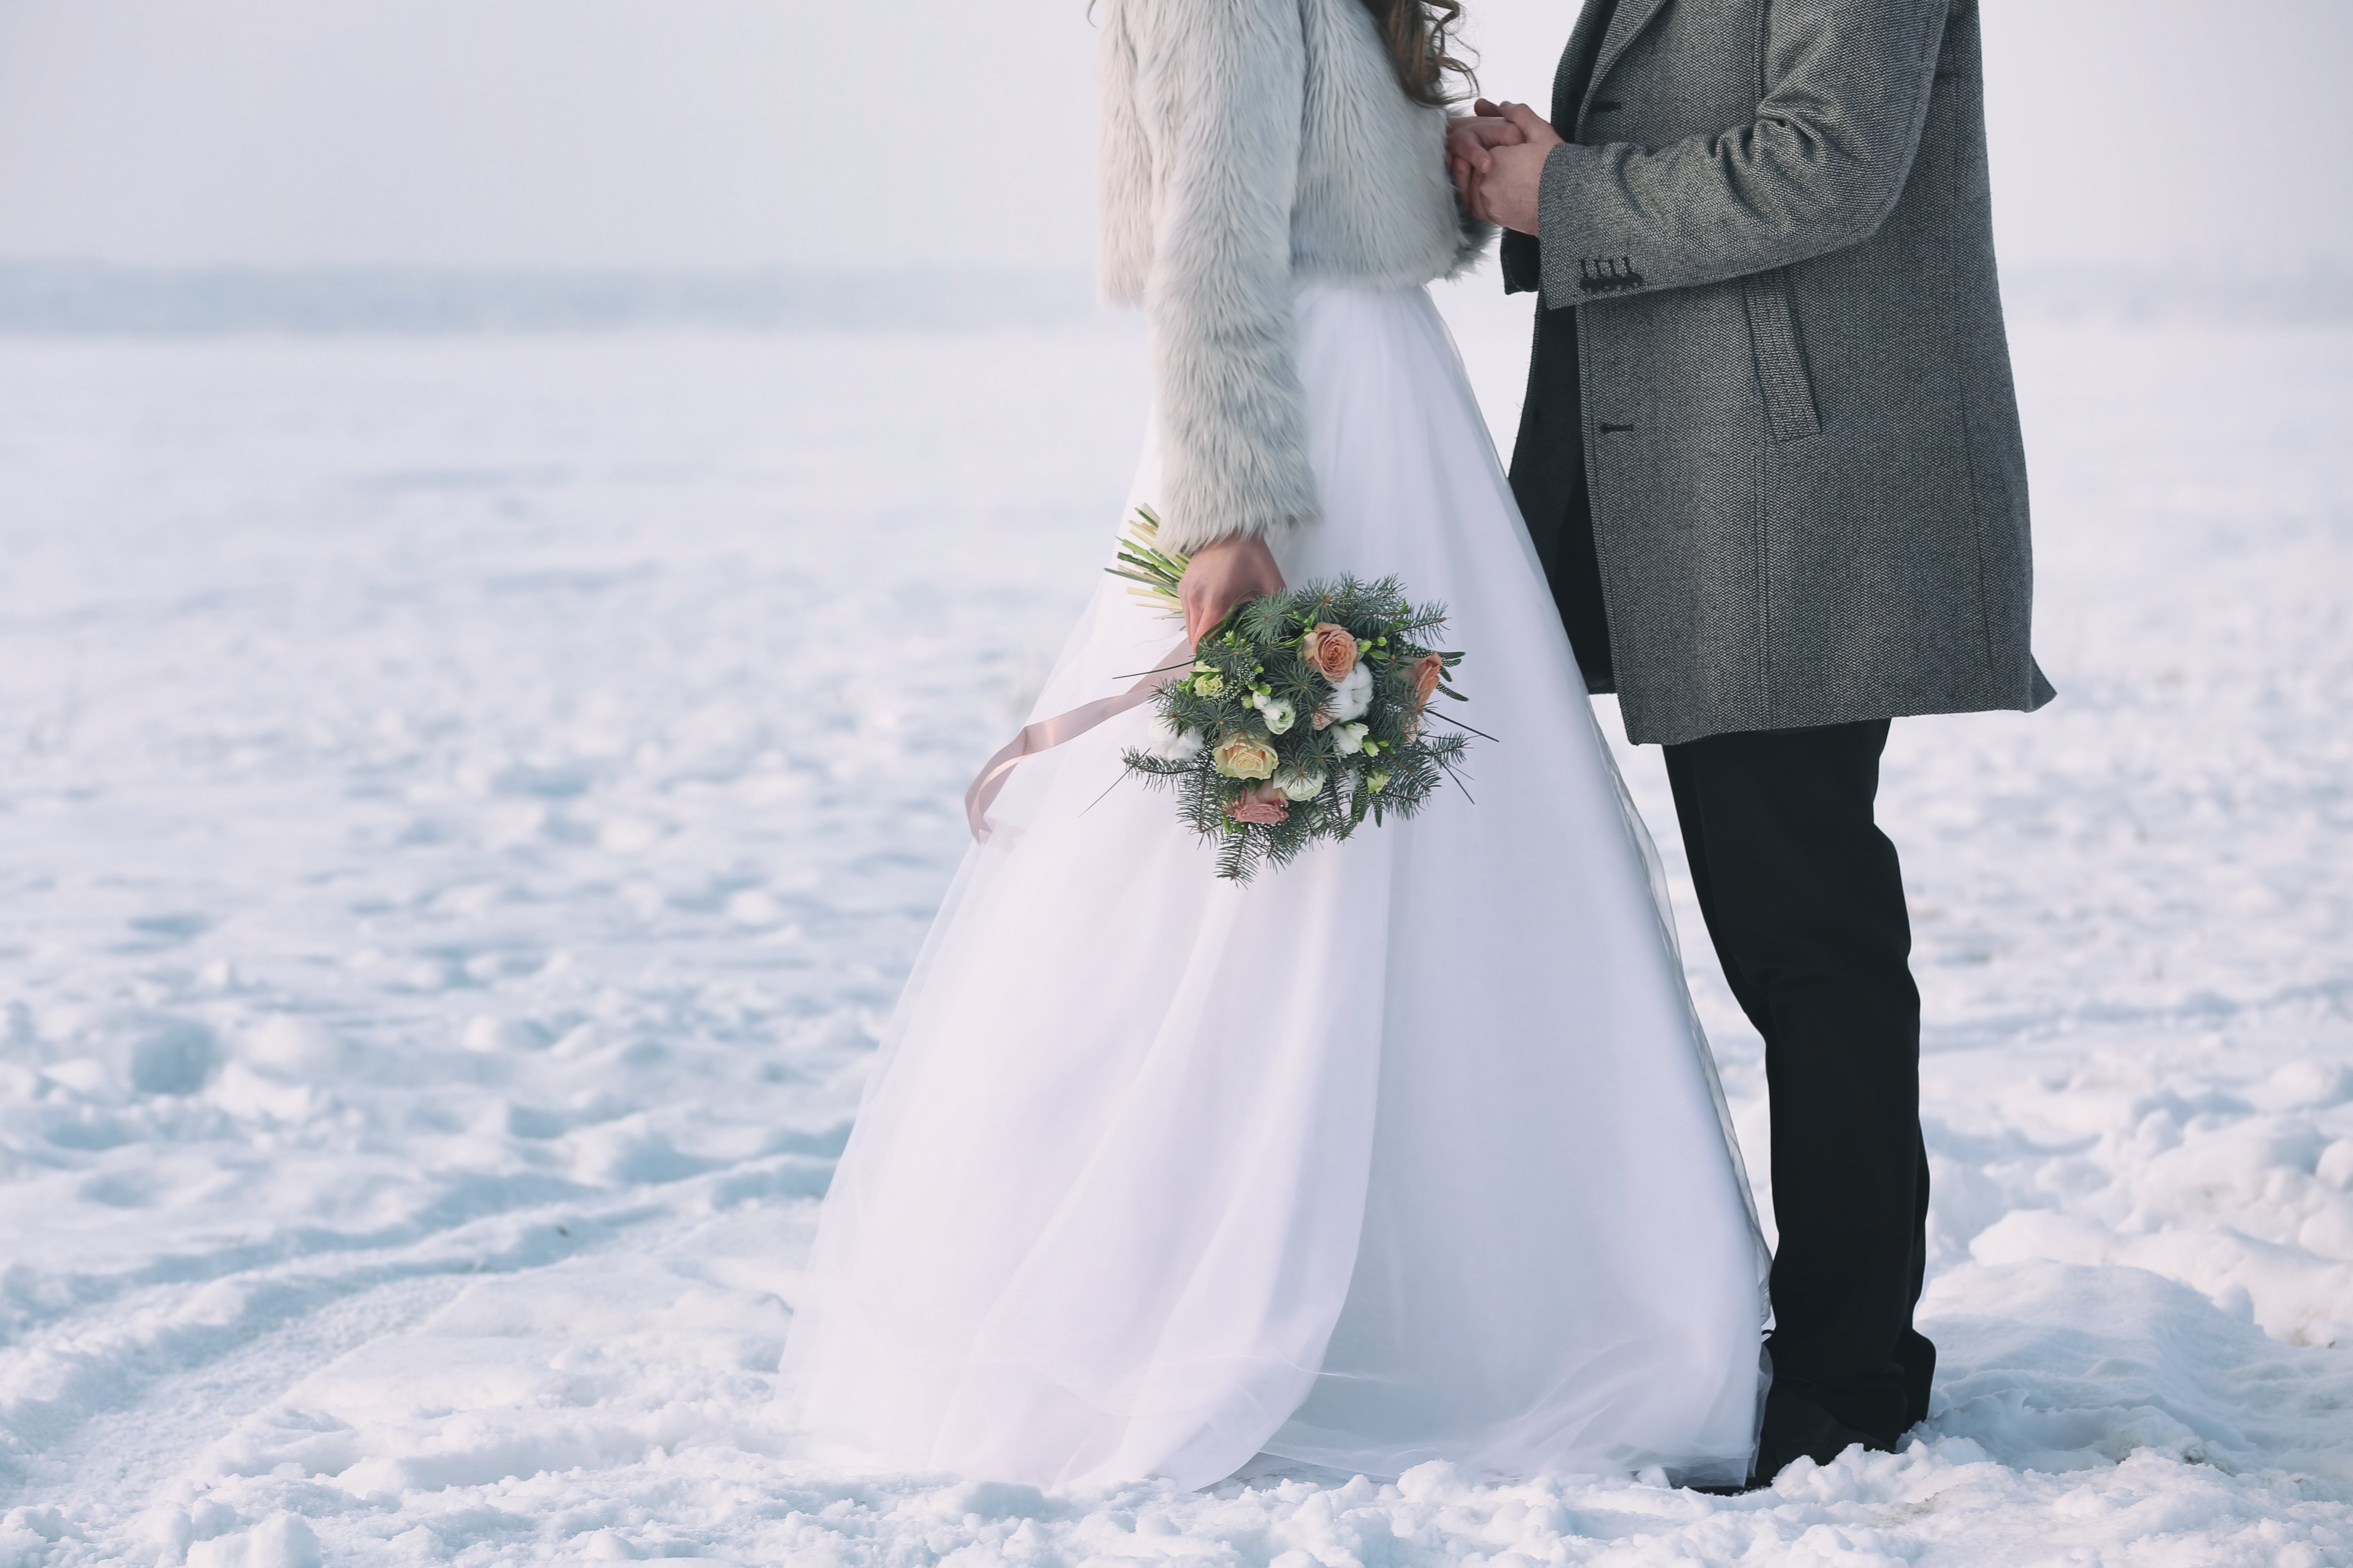 Which Season is the Right Season for You to Get Married